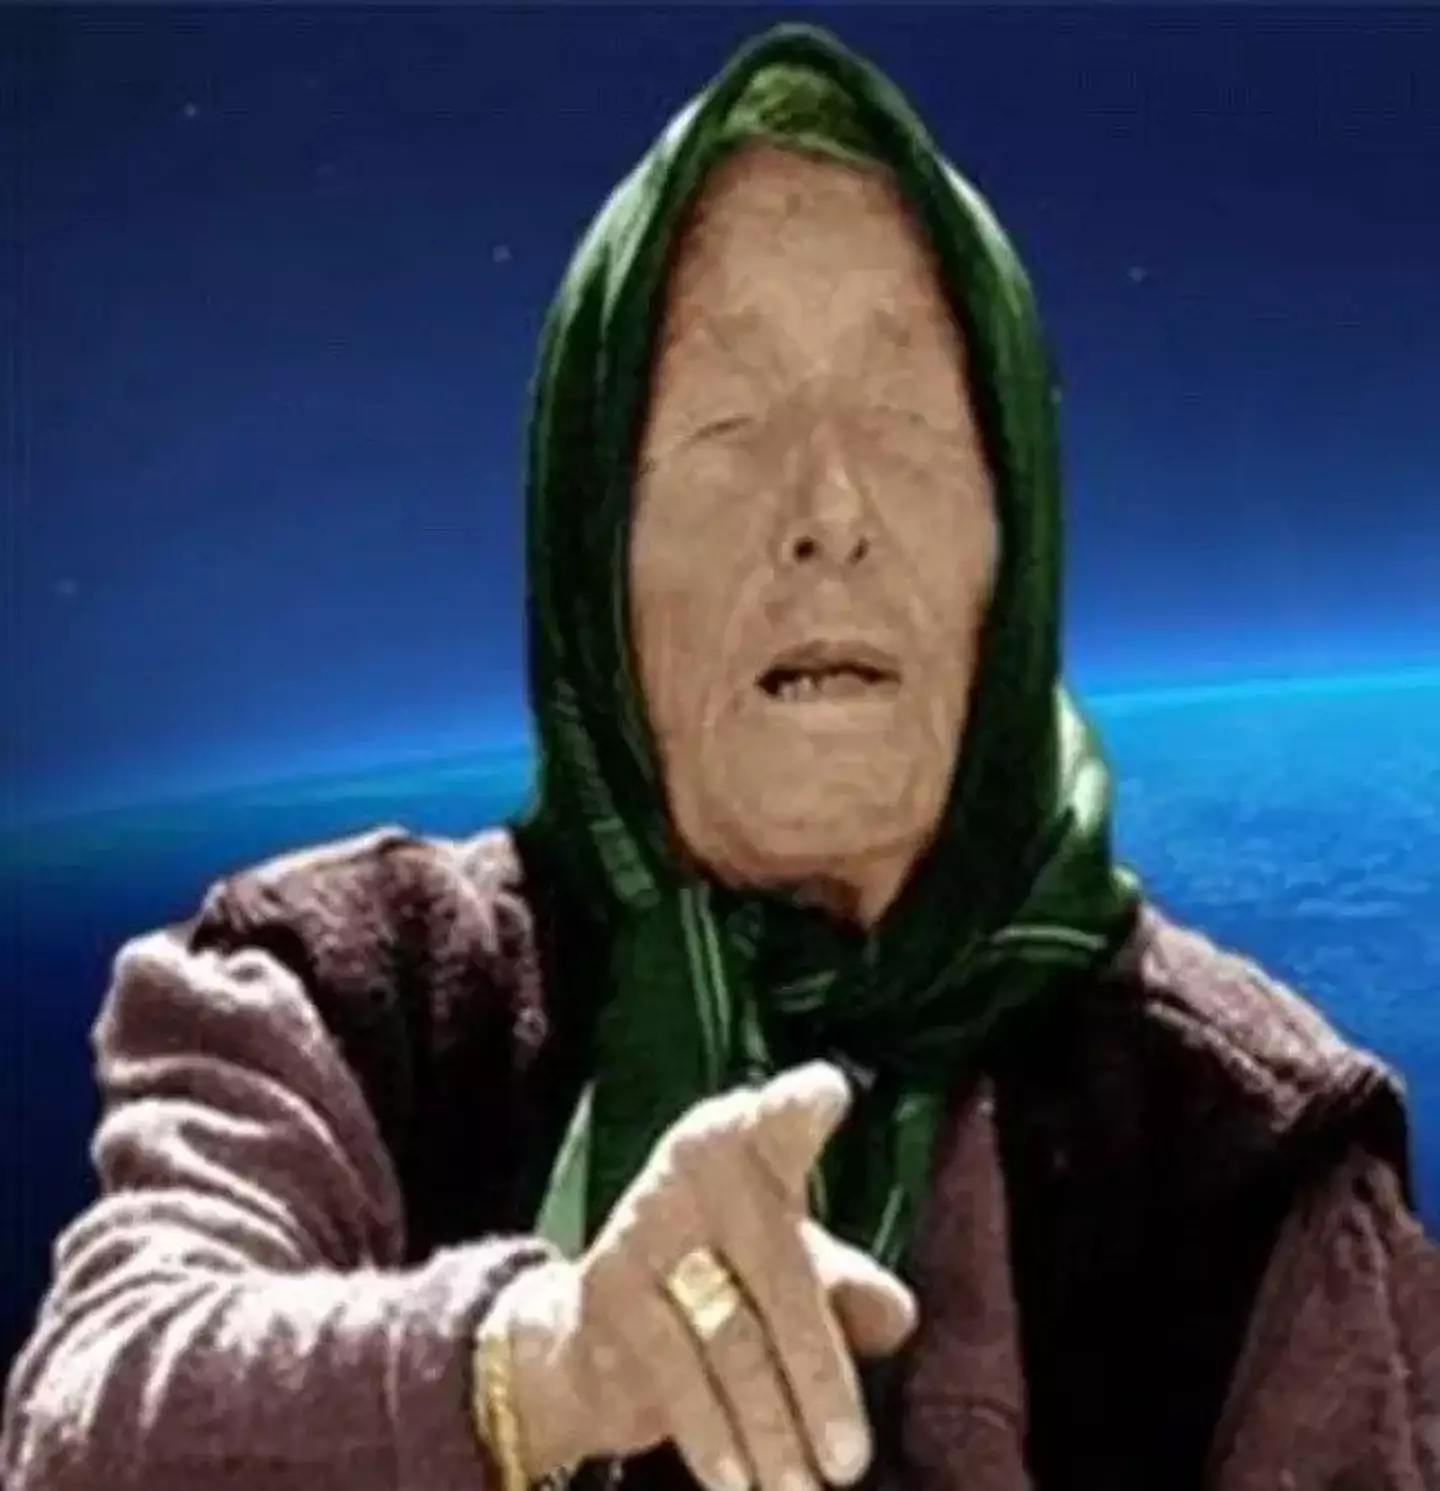 Baba Vanga's predictions go up until the year 5079.